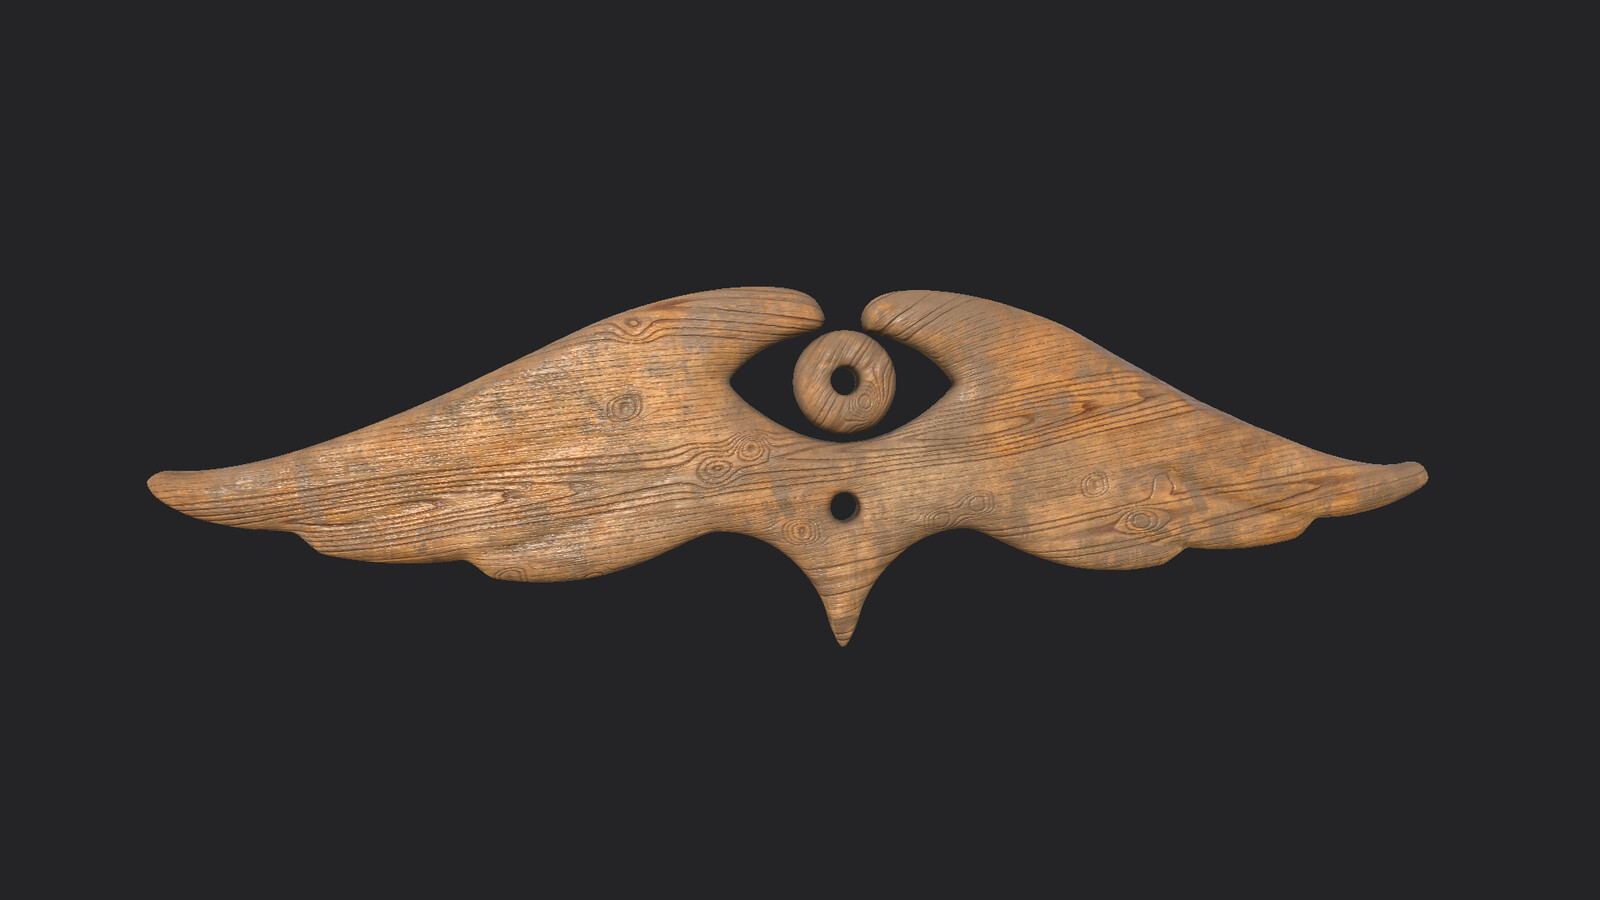 Substance Painter view of the wood pendant. A slightly simplified Version of the Studio's Logo.